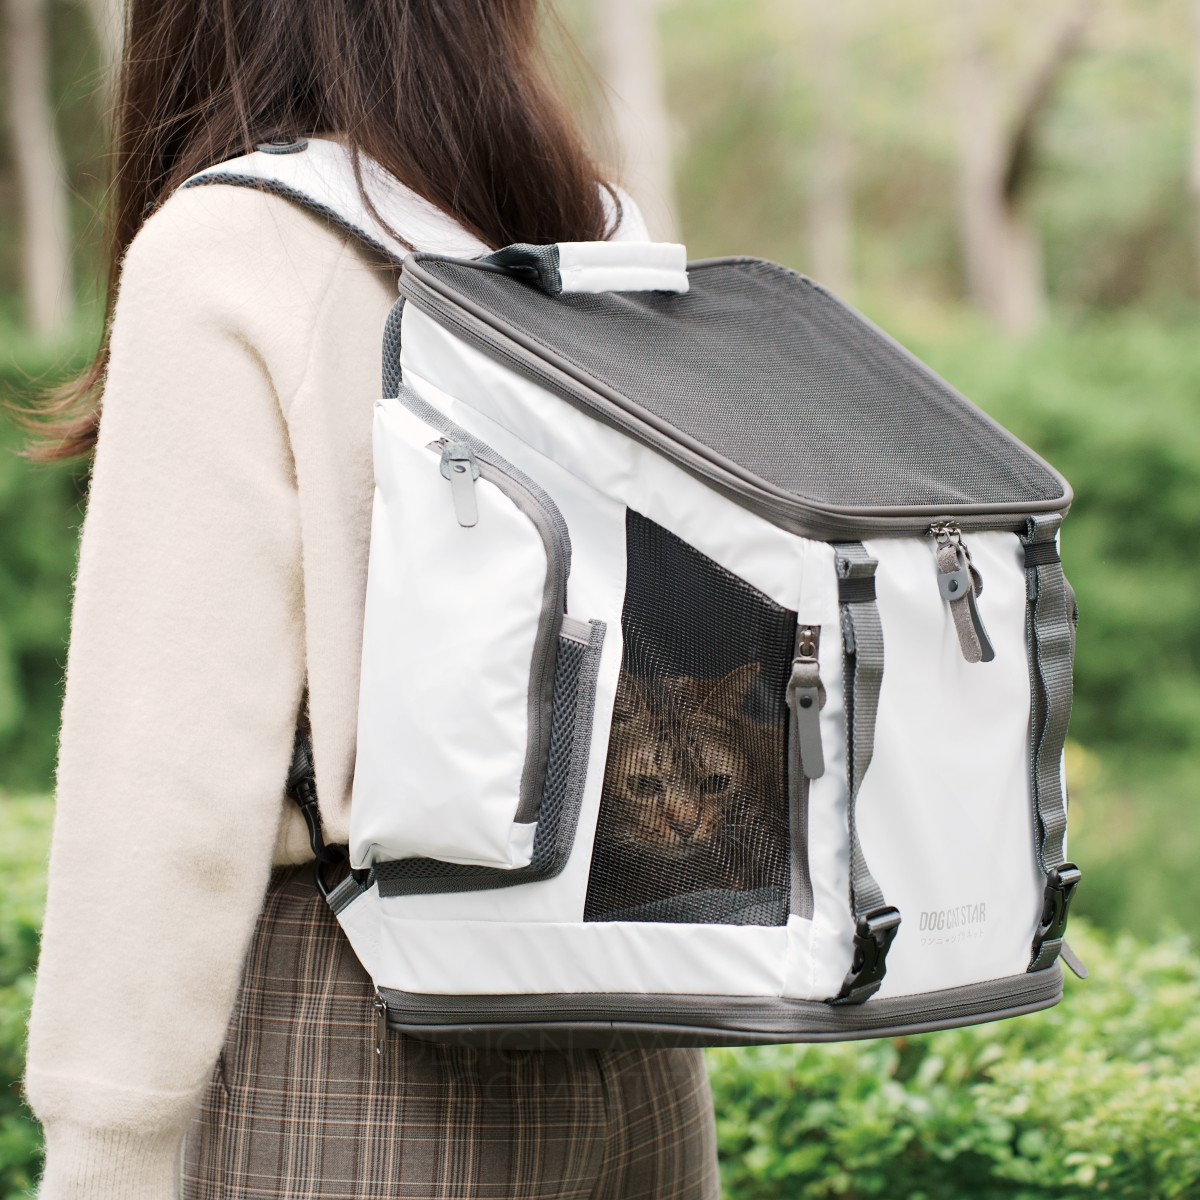 Planddo Co., Ltd. wins Silver at the prestigious A' Pet Care, Toys, Supplies and Products for Animals Design Award with Little Cube Pet Backpack.